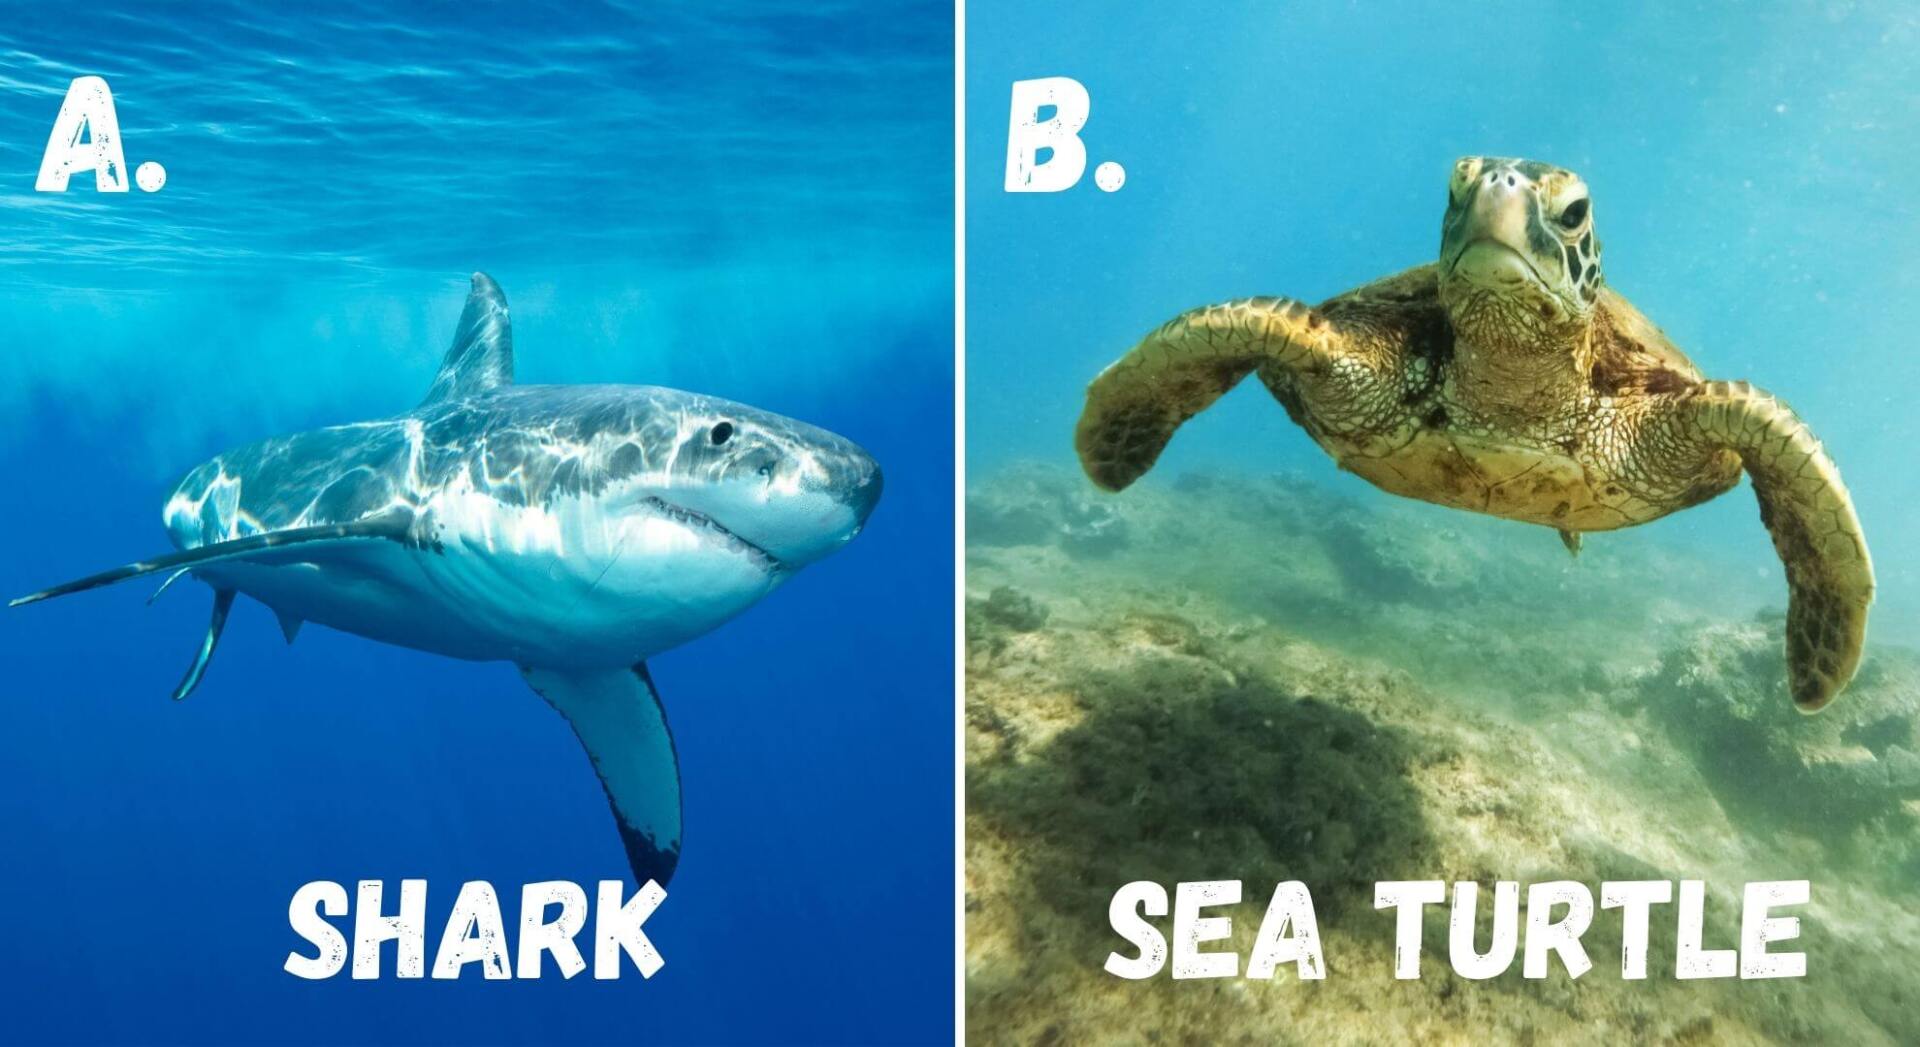 sharks are an apex predator in ocean ecosystems, unlike turtles who are herbivores